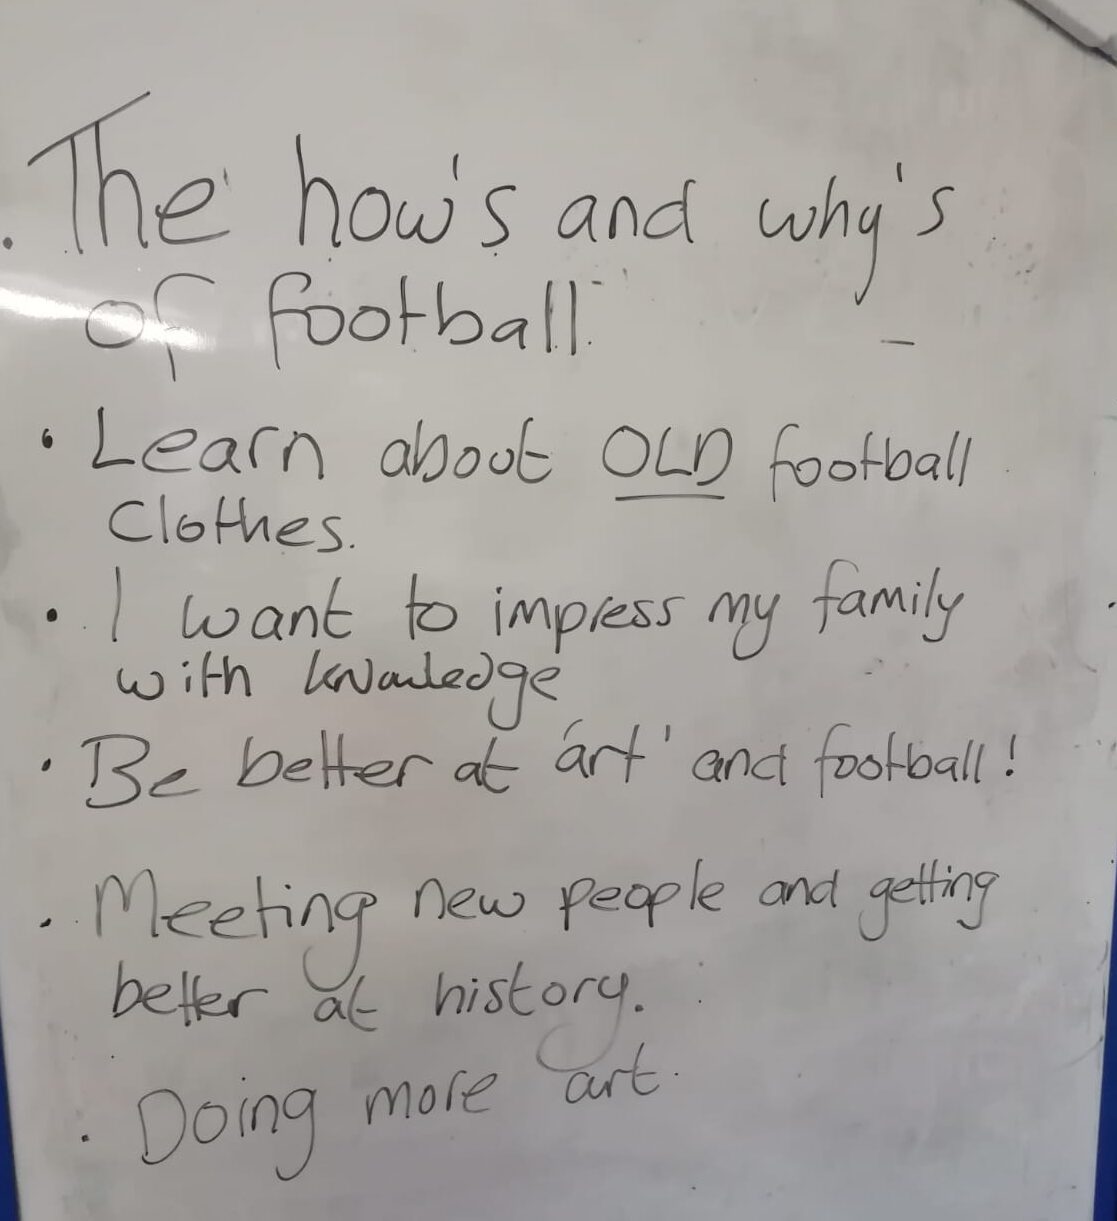 The how's and why's of football, to learn about old football clothes, I want to impress my family with knowledge, be better at art and football, meeting new people and getting better at history, doing more art